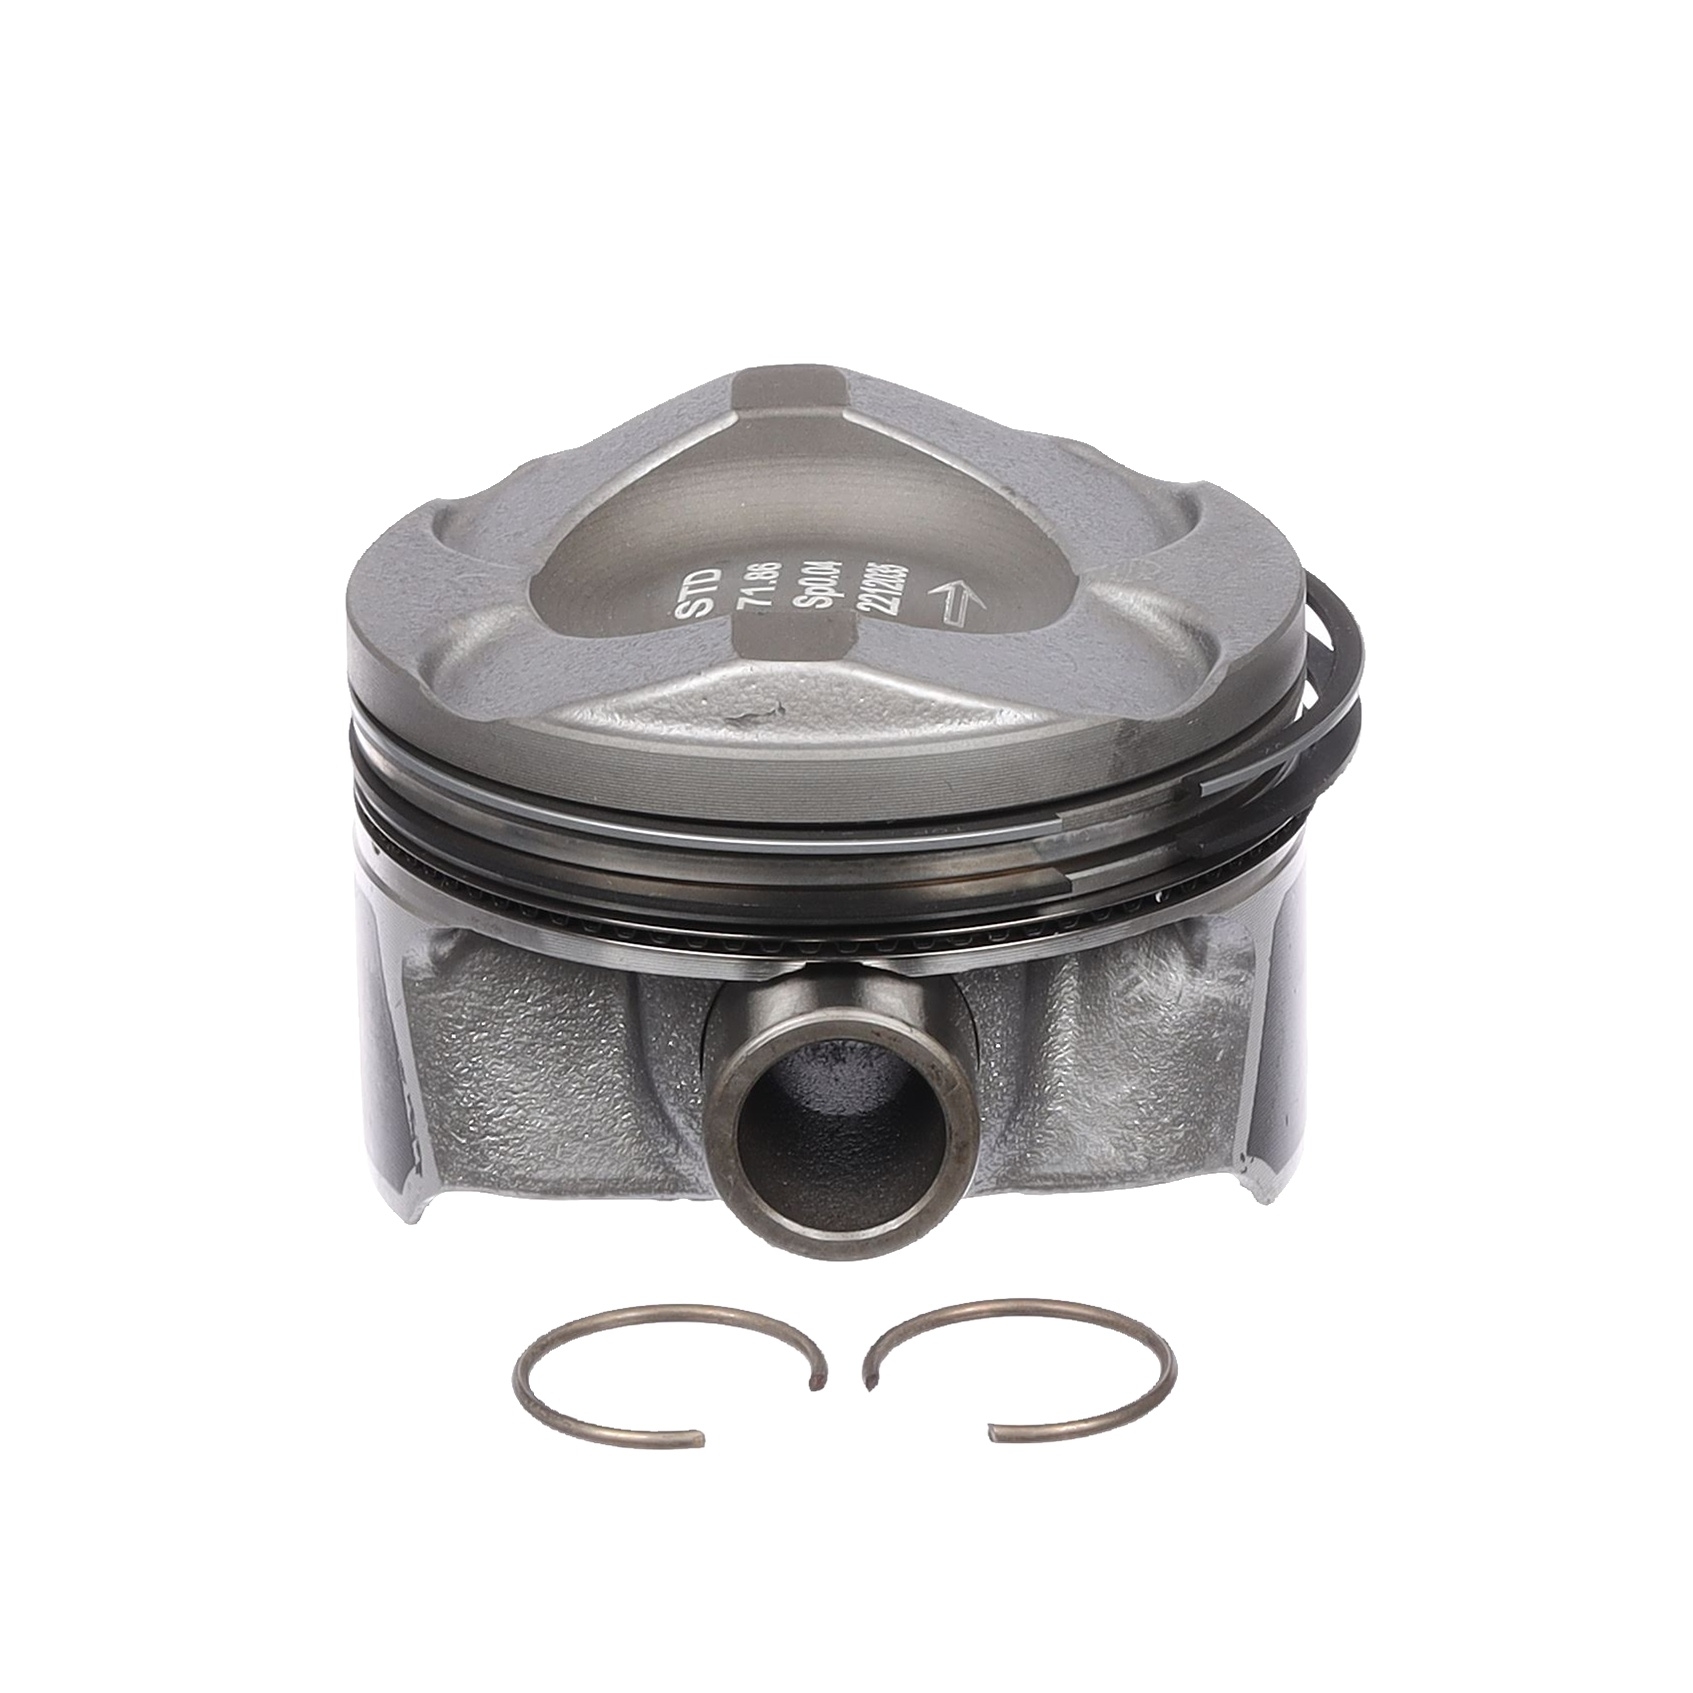 Ford Piston ET ENGINETEAM PM008550 at a good price